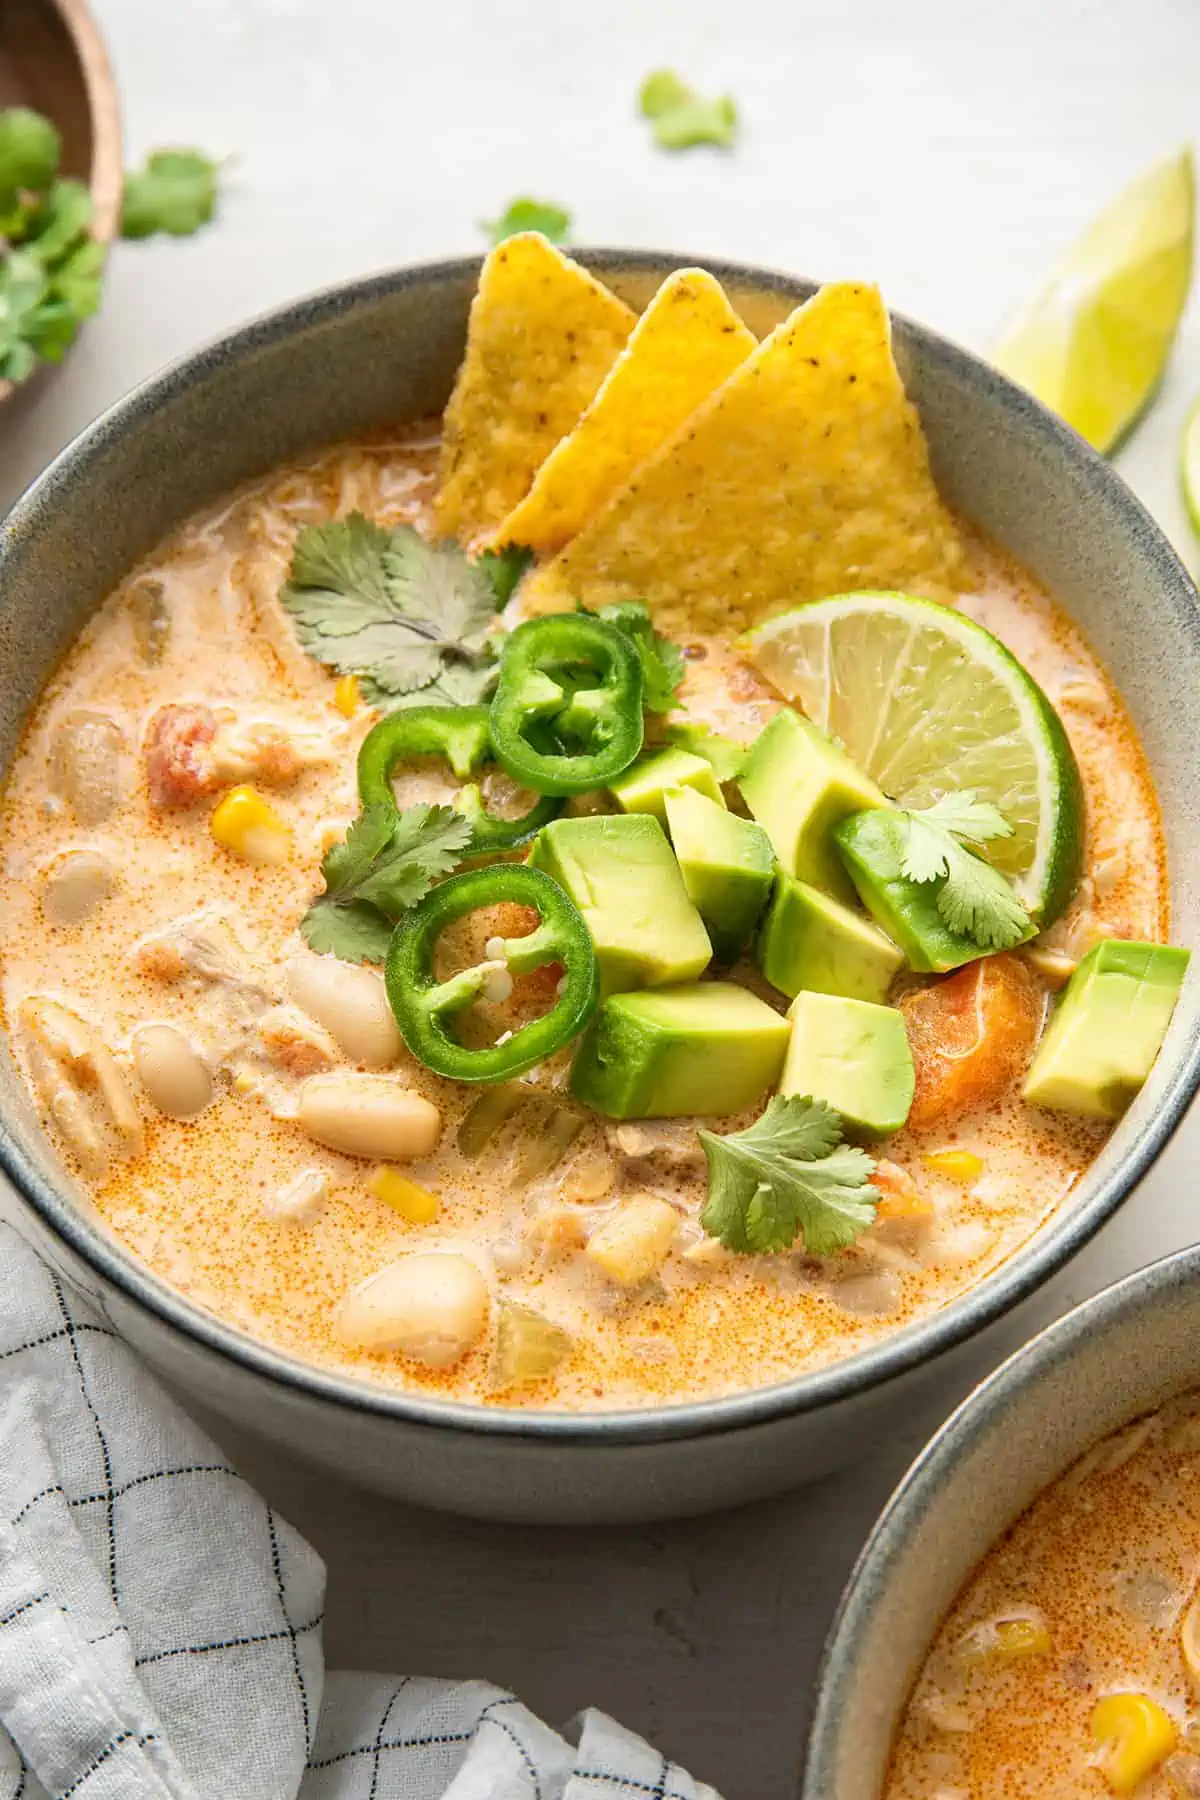 Close up of a bowl of white chicken chili garnished with tortilla chips, a lime wedge, cilantro, and chunks of avocado and chilis